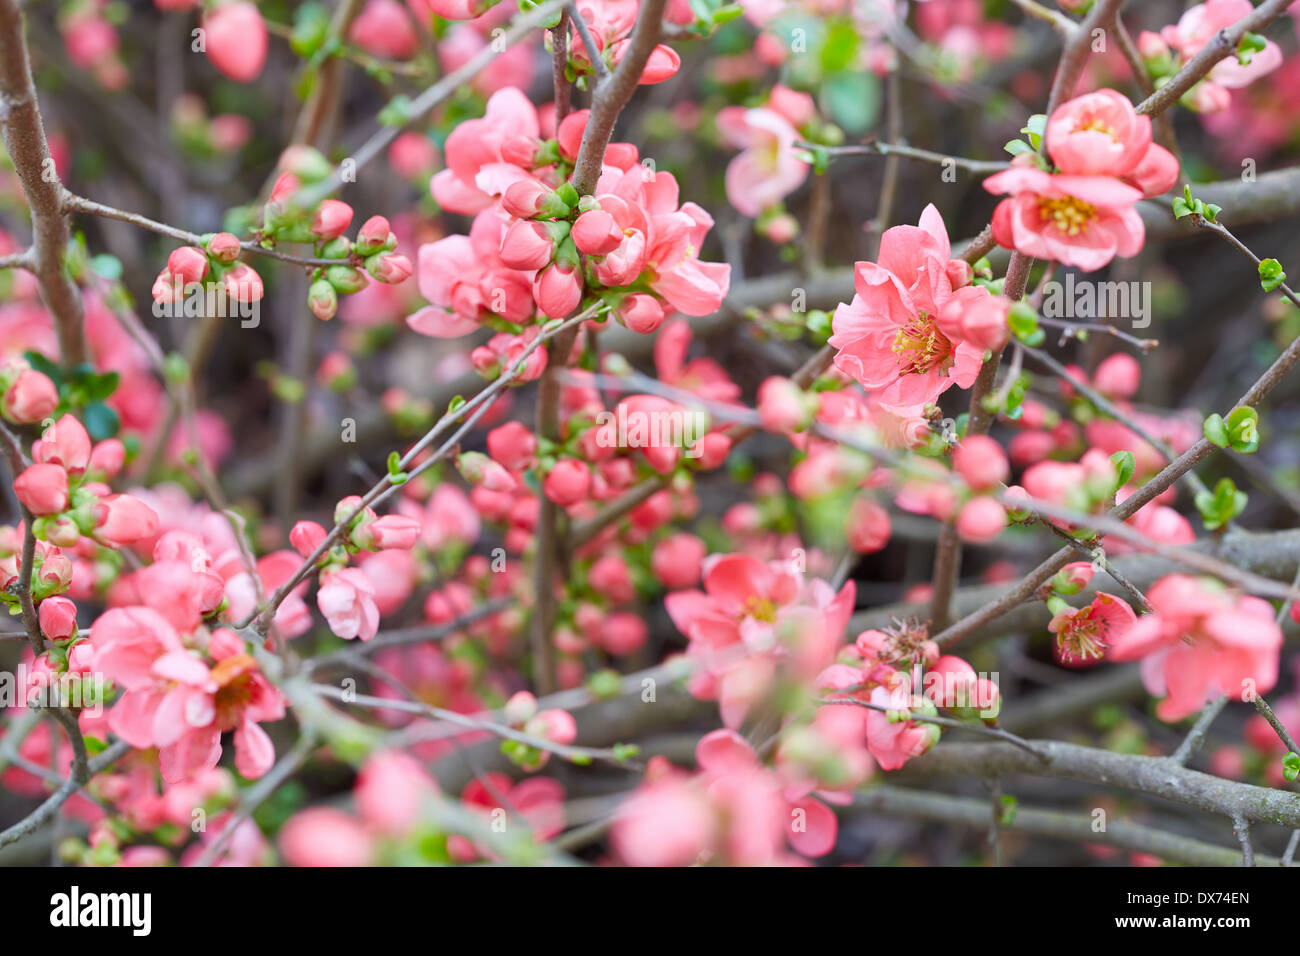 Spring background with pink blossom, flowers and buds Stock Photo